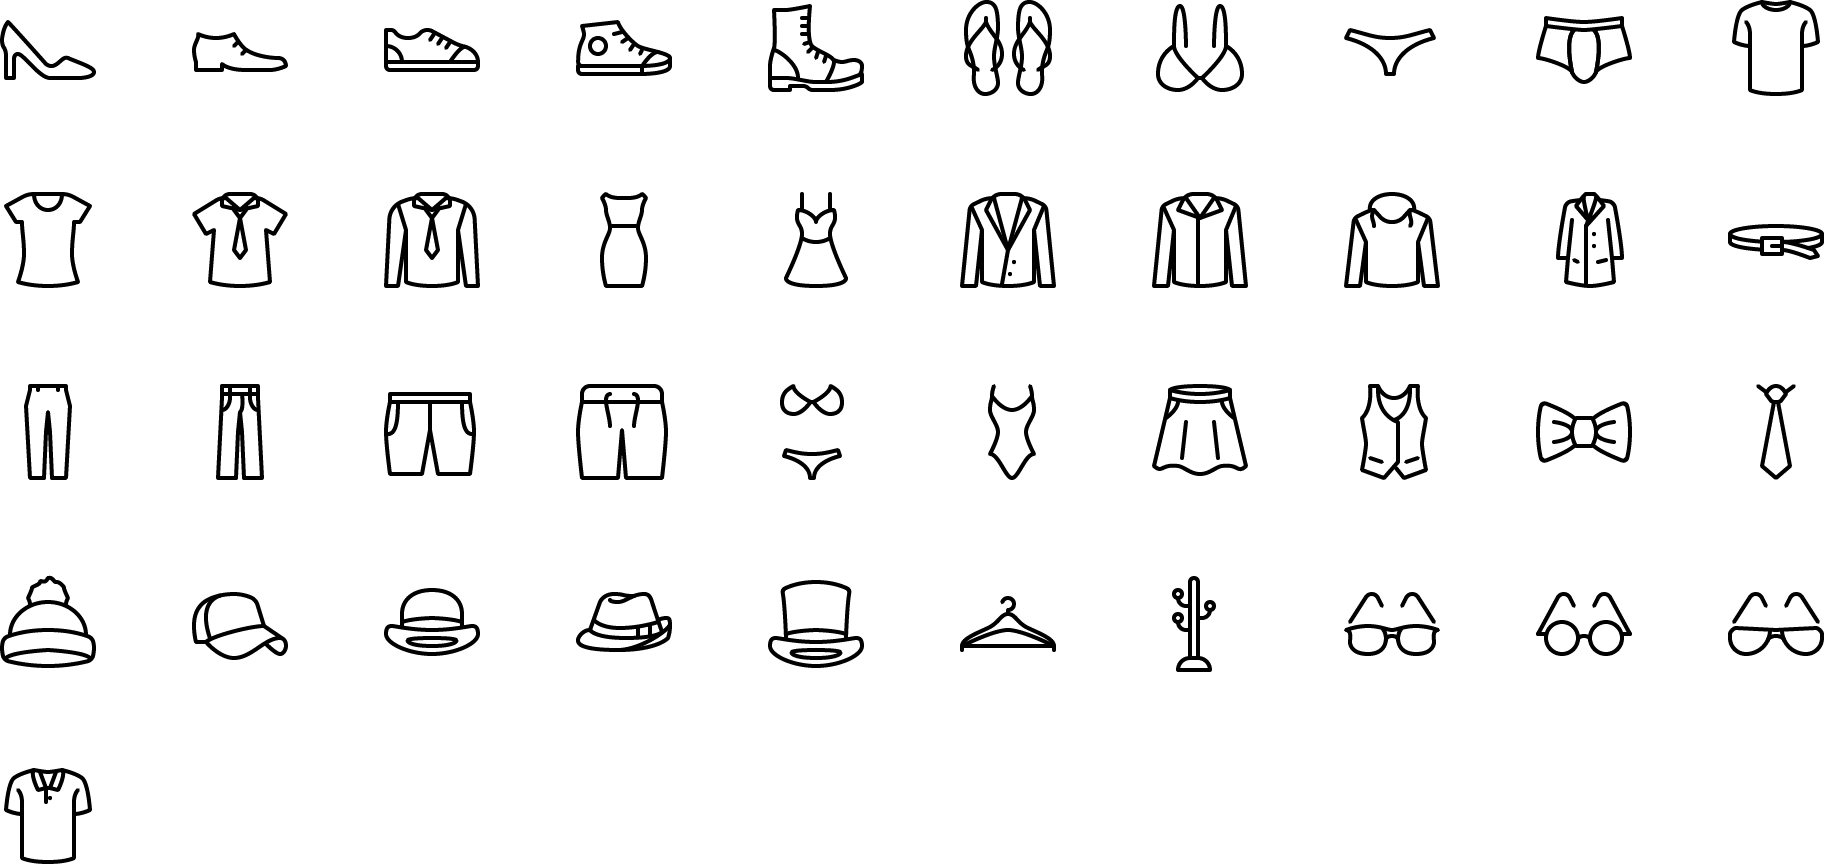 140 clothes icon packs - Vector icon packs - SVG, PSD, PNG, EPS 